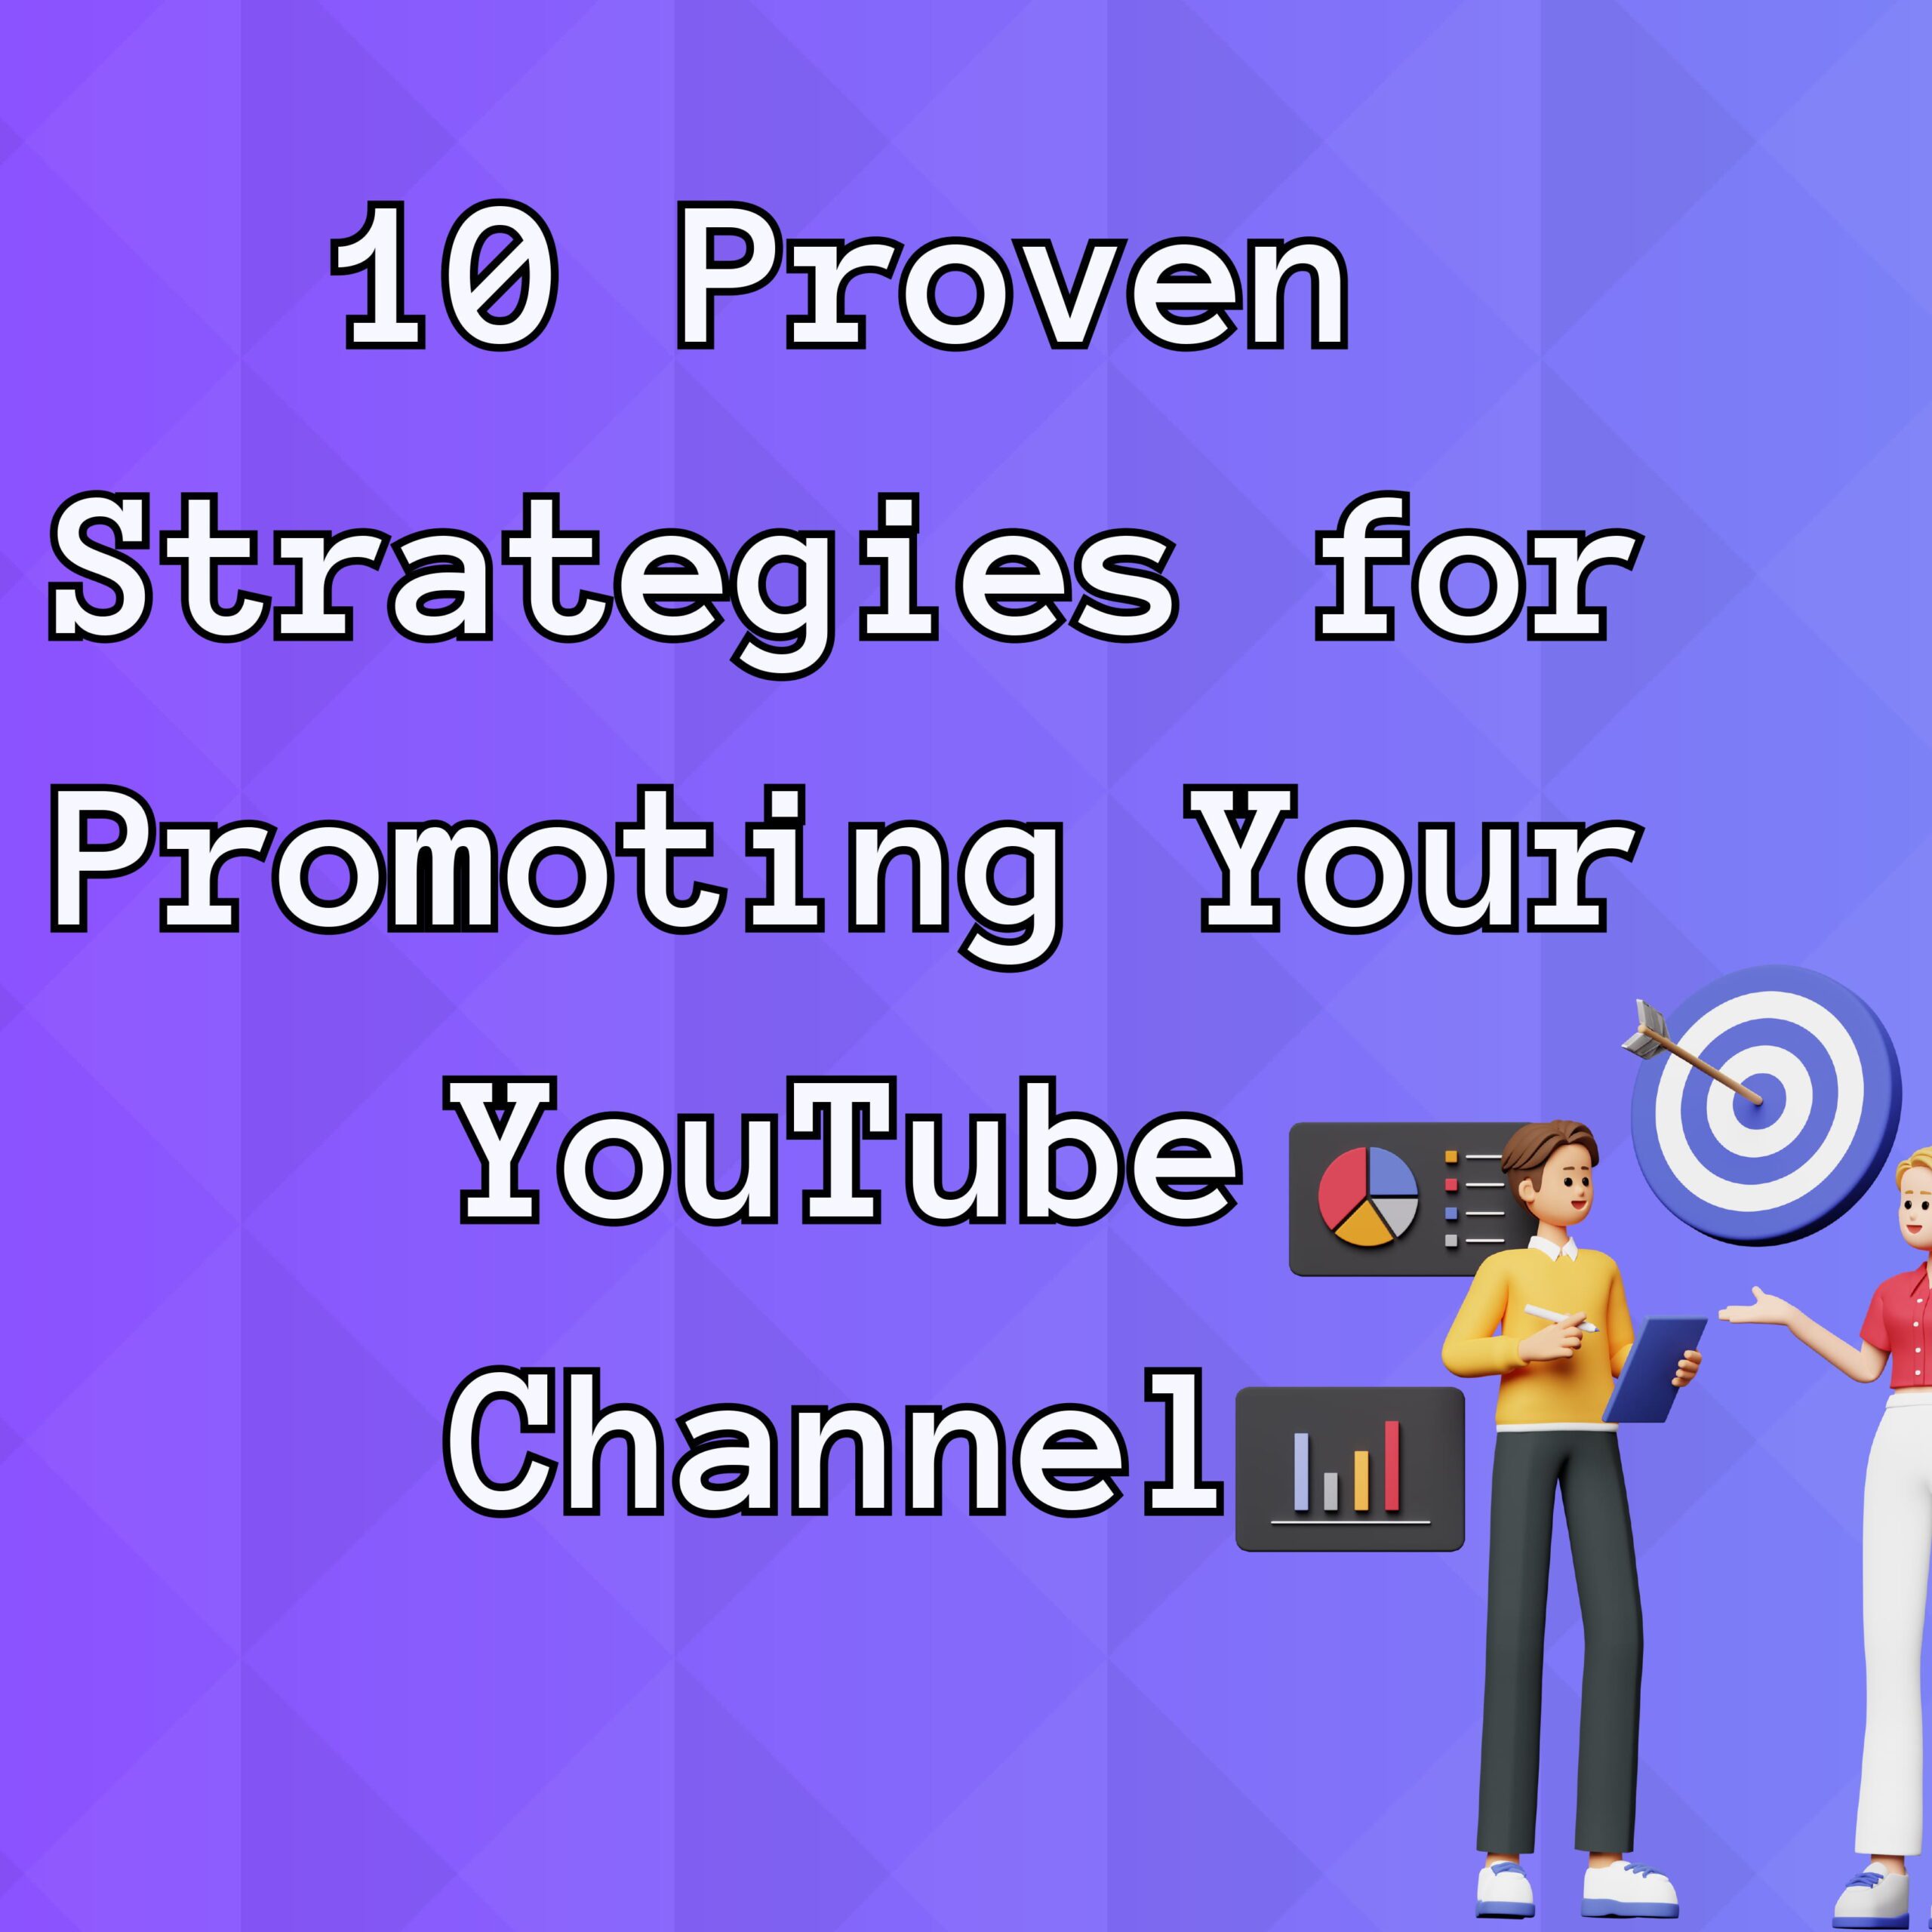 10 Proven Strategies for Promoting Your YouTube Channel